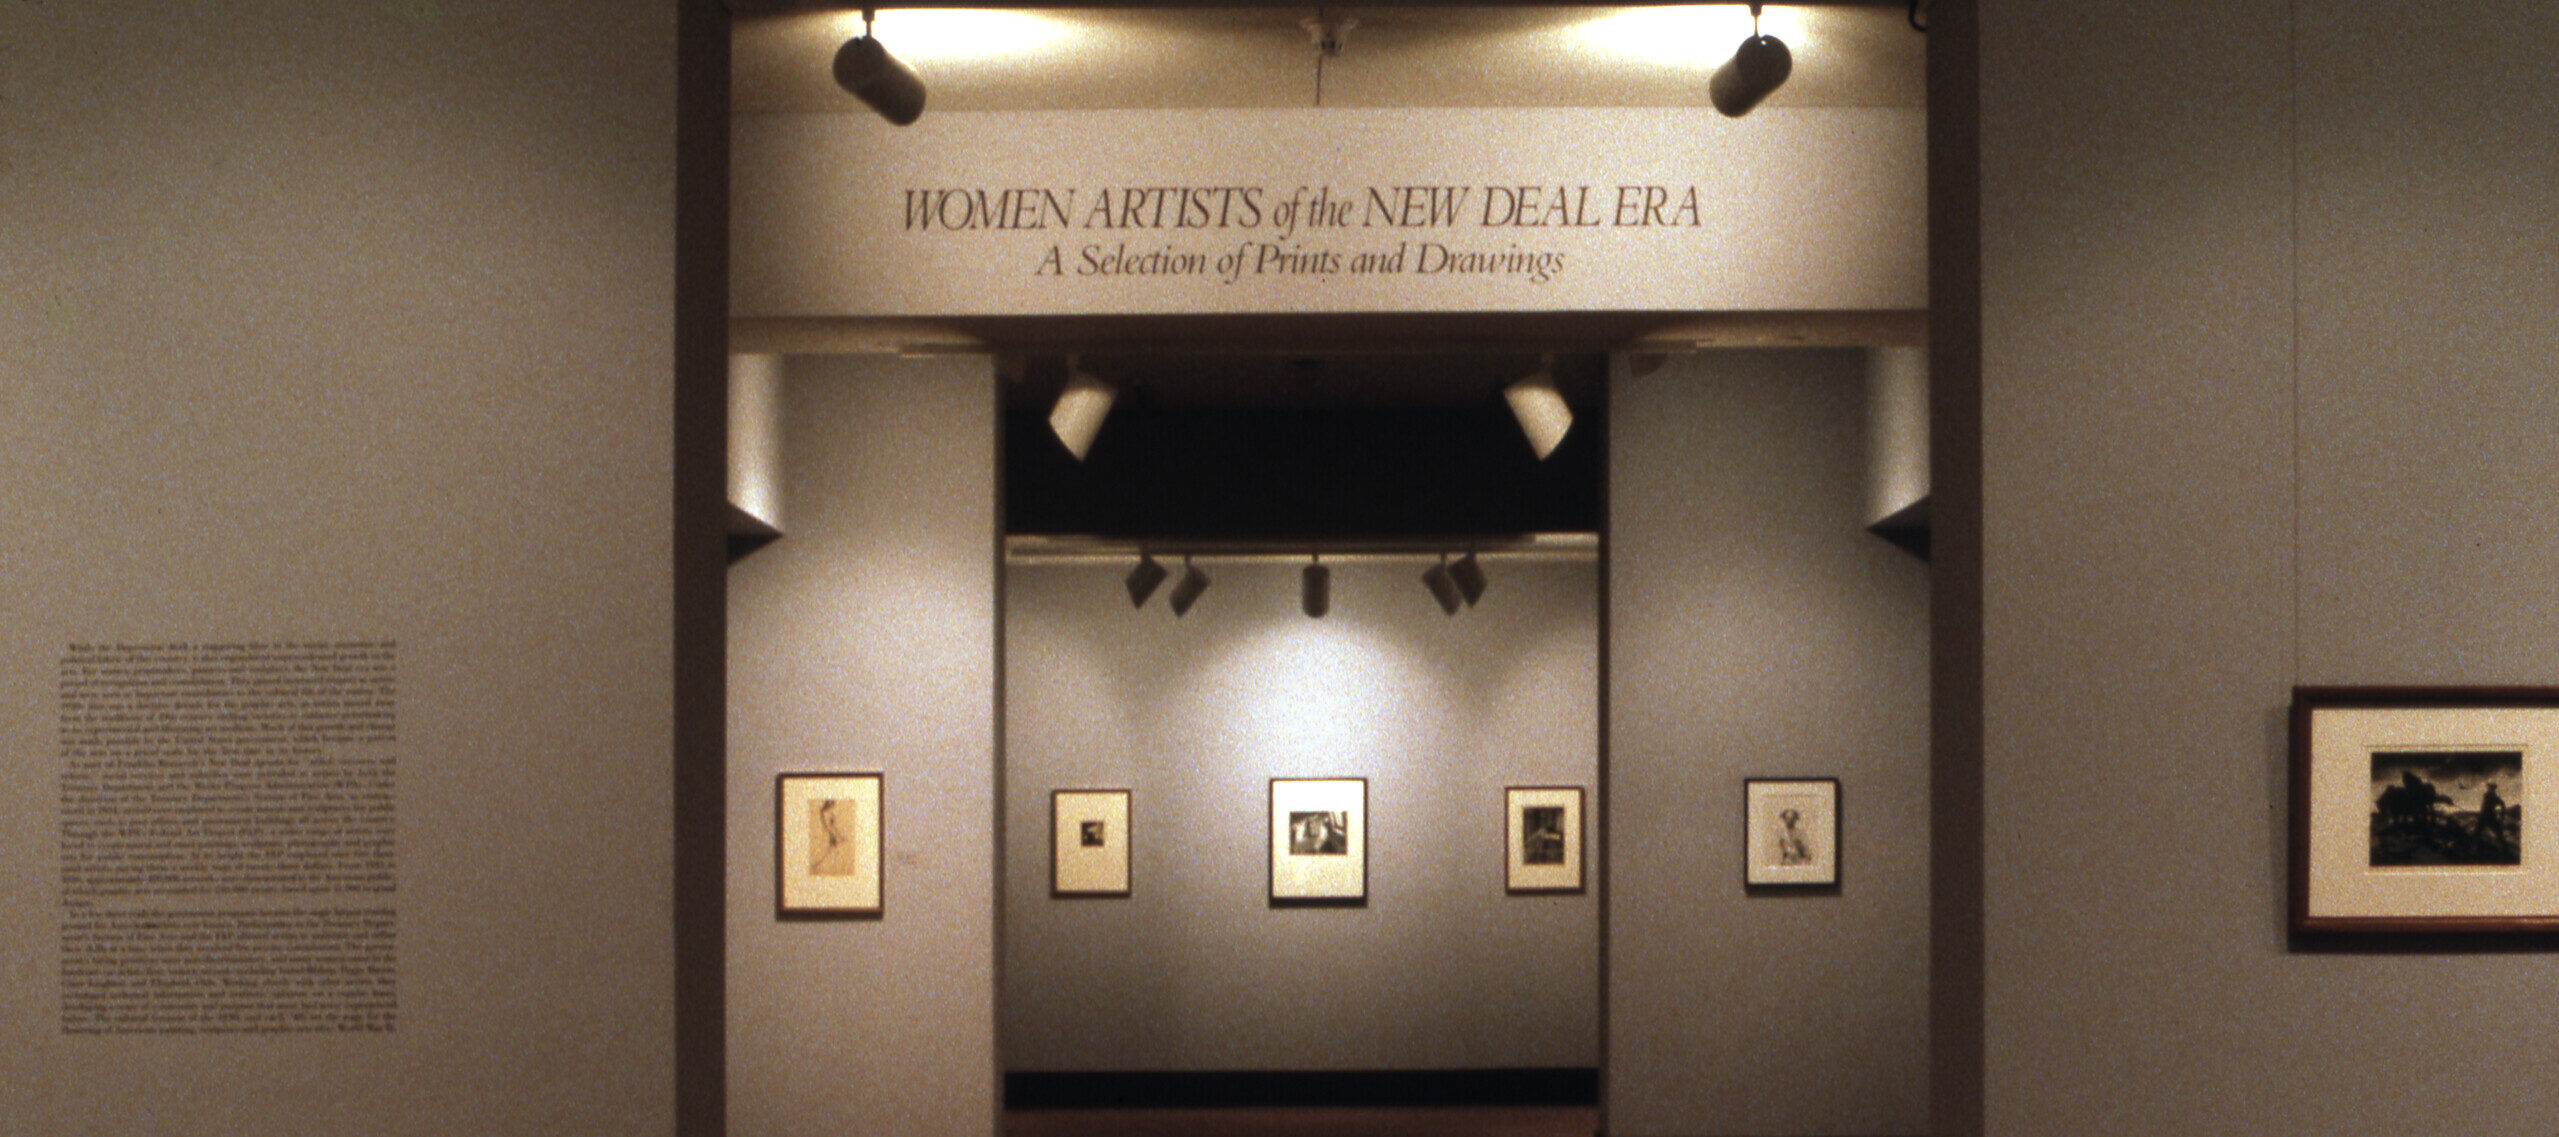 A view of a gallery space. The walls are painted gray, and several artworks are hanging on them. In large letters, it says on a wall 